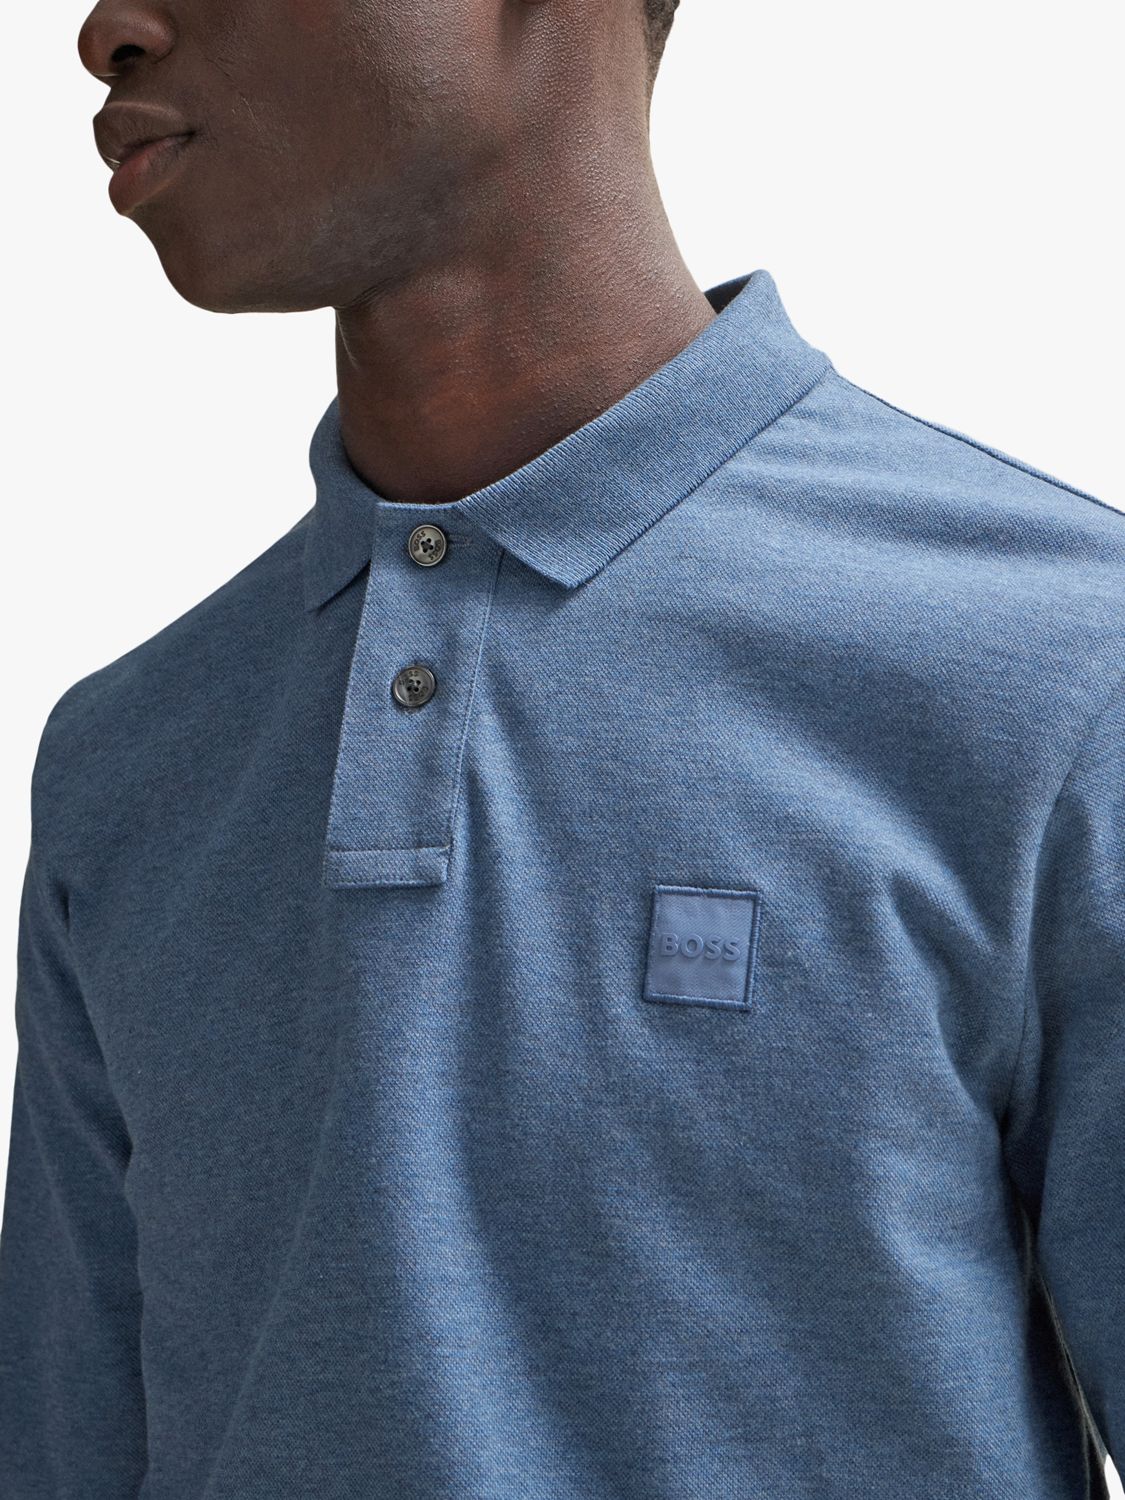 BOSS Passerby Long Sleeve Polo Shirt, Blue at John Lewis & Partners